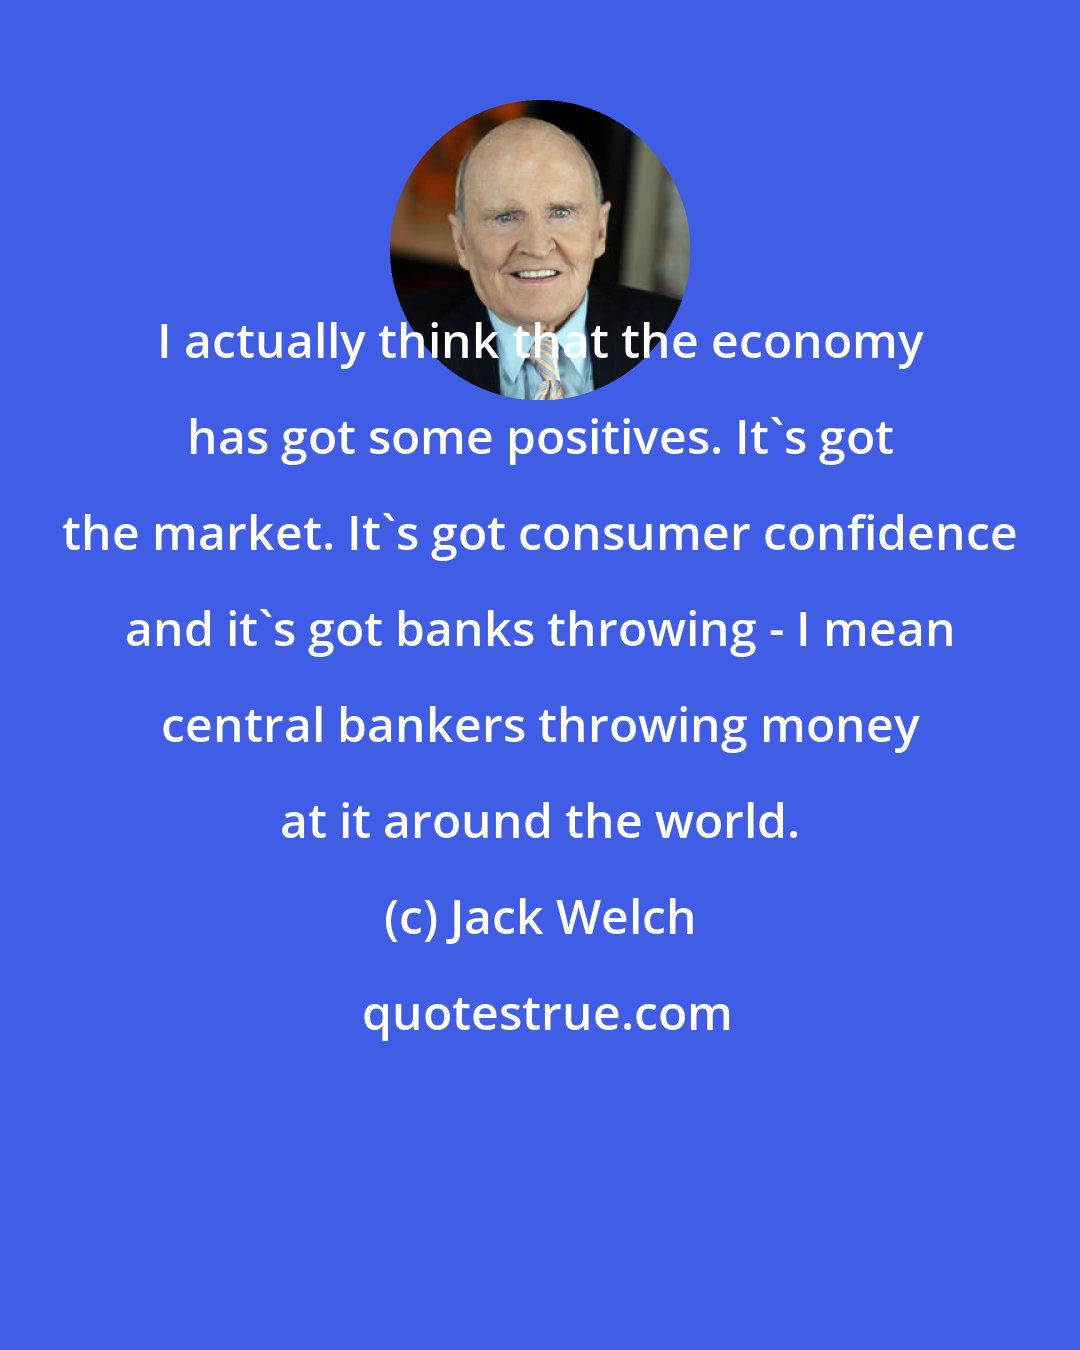 Jack Welch: I actually think that the economy has got some positives. It's got the market. It's got consumer confidence and it's got banks throwing - I mean central bankers throwing money at it around the world.